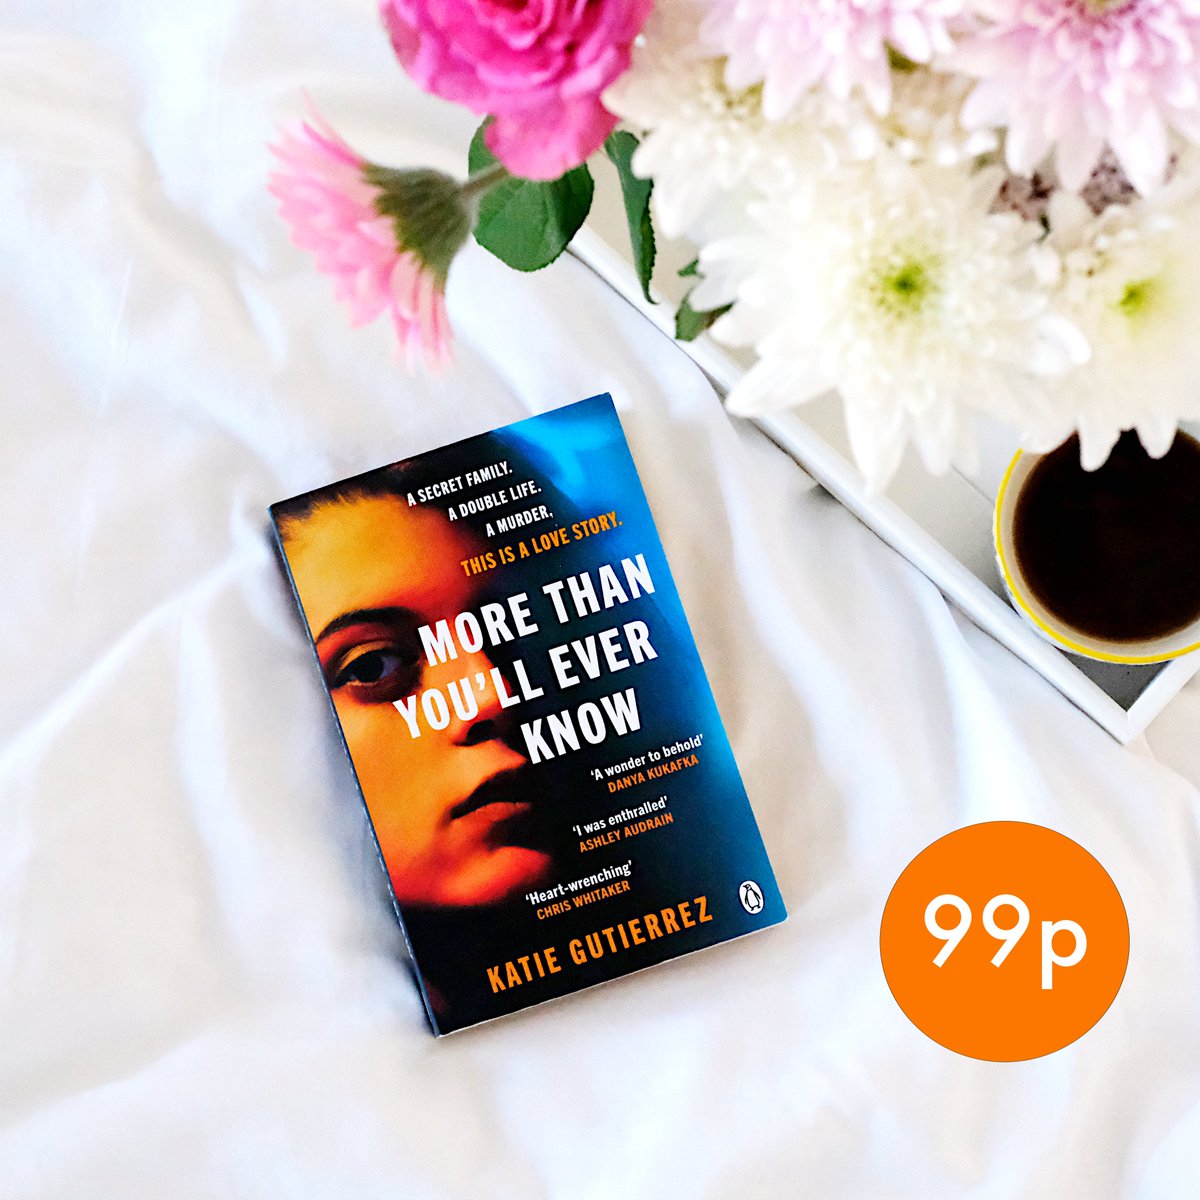 ‘WOW, WOW WOW. Do not miss this book’ ⭐️⭐️⭐️⭐️⭐️ ‘Gripping, kept me on my toes’ ⭐️⭐️⭐️⭐️⭐️ ‘What an absolutely fabulous book’ ⭐️⭐️⭐️⭐️⭐️ Readers are obsessed with @katie_gutz's More Than You’ll Ever Know – read it now for just 99p! bit.ly/3RIM0fD